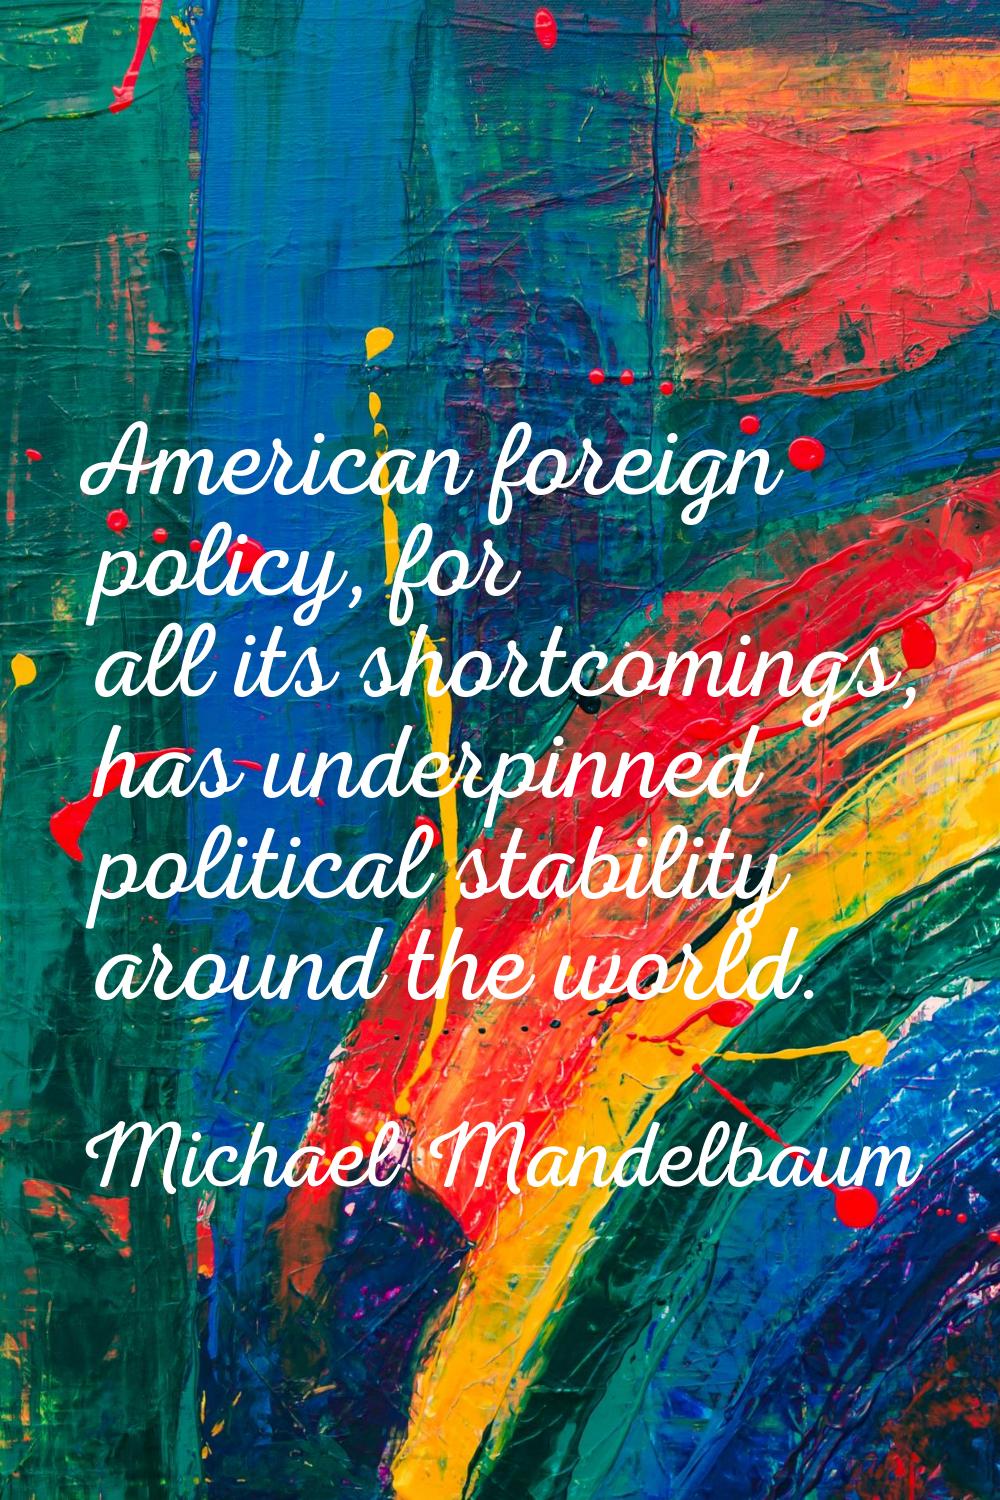 American foreign policy, for all its shortcomings, has underpinned political stability around the w